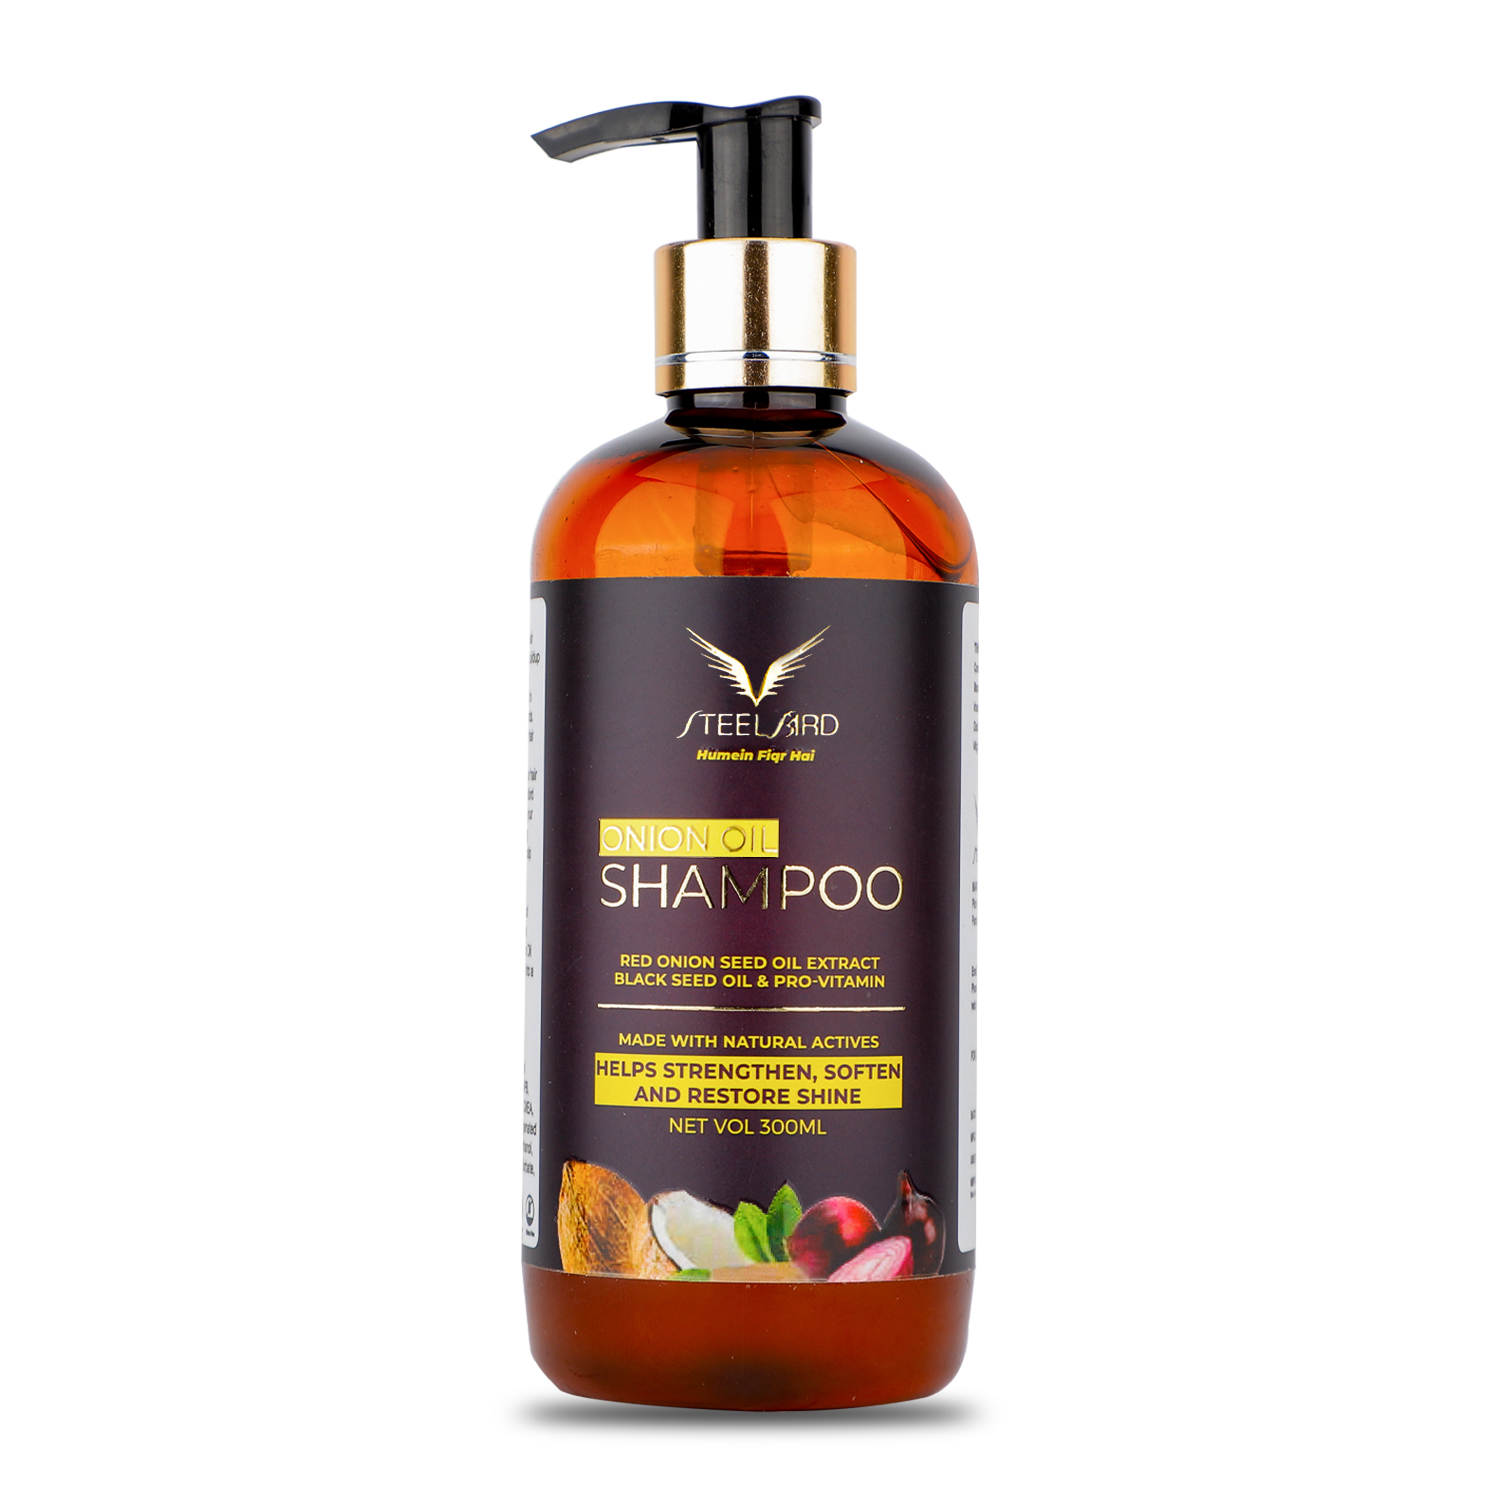 Steelbird Hair Care Onion Shampoo With Red Onion Seed Oil Extract, Black Seed Oil & Pro-Vitamin B5 - No Parabens, Sulphates, Silicones, Color & Peg - 300ml